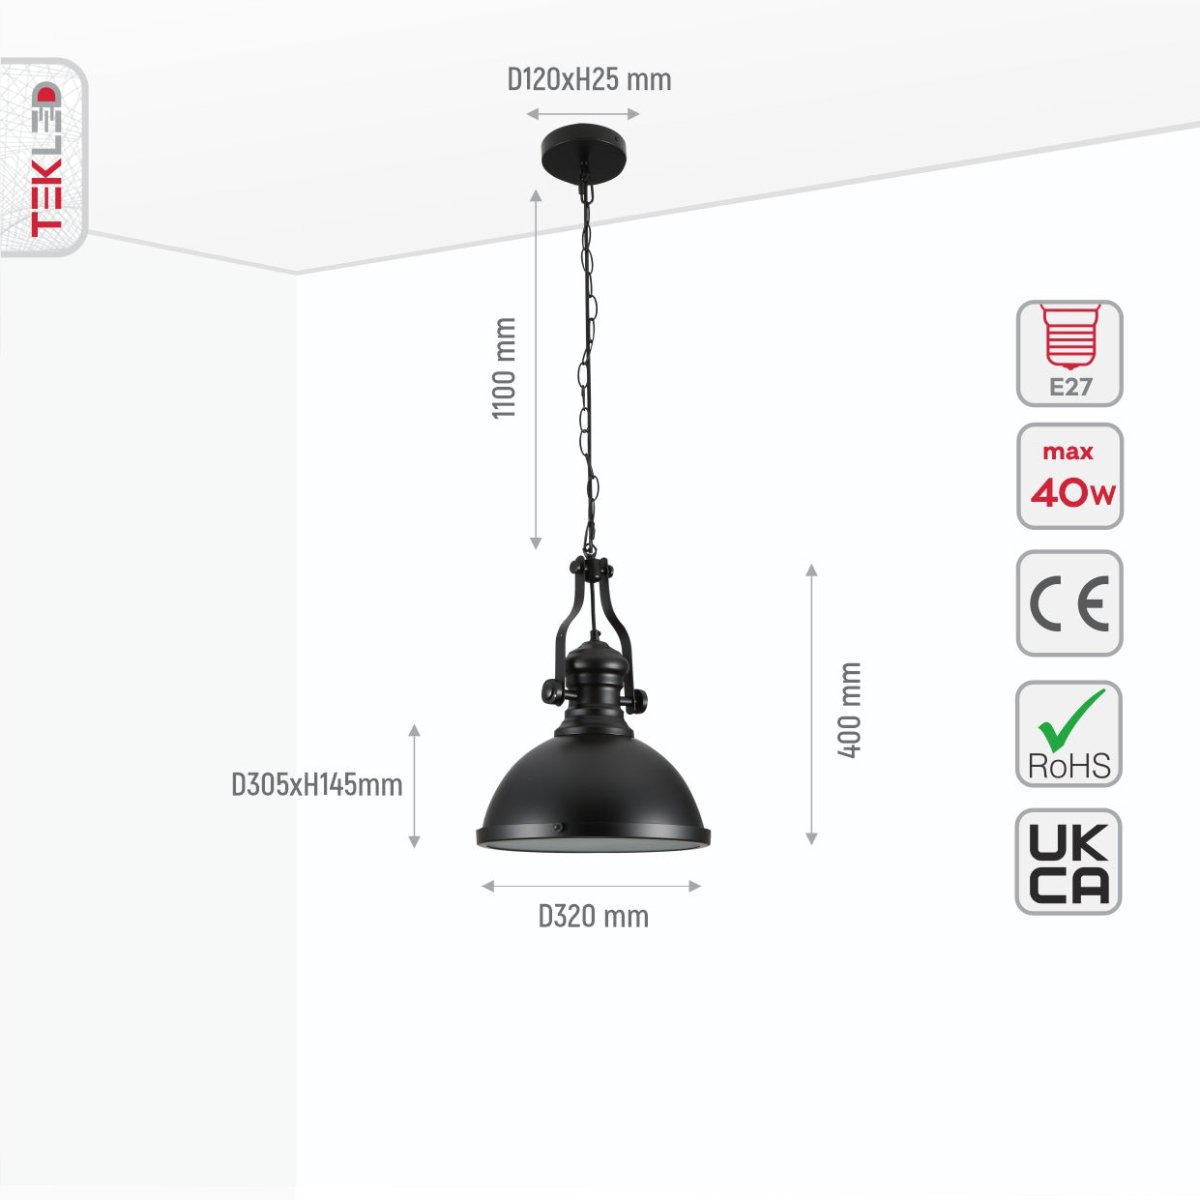 Size and specs of Black Nautical Industrial Caged Dome Shade Glass Metal Ceiling Pendant Light with E27 Fitting  | TEKLED 150-18372